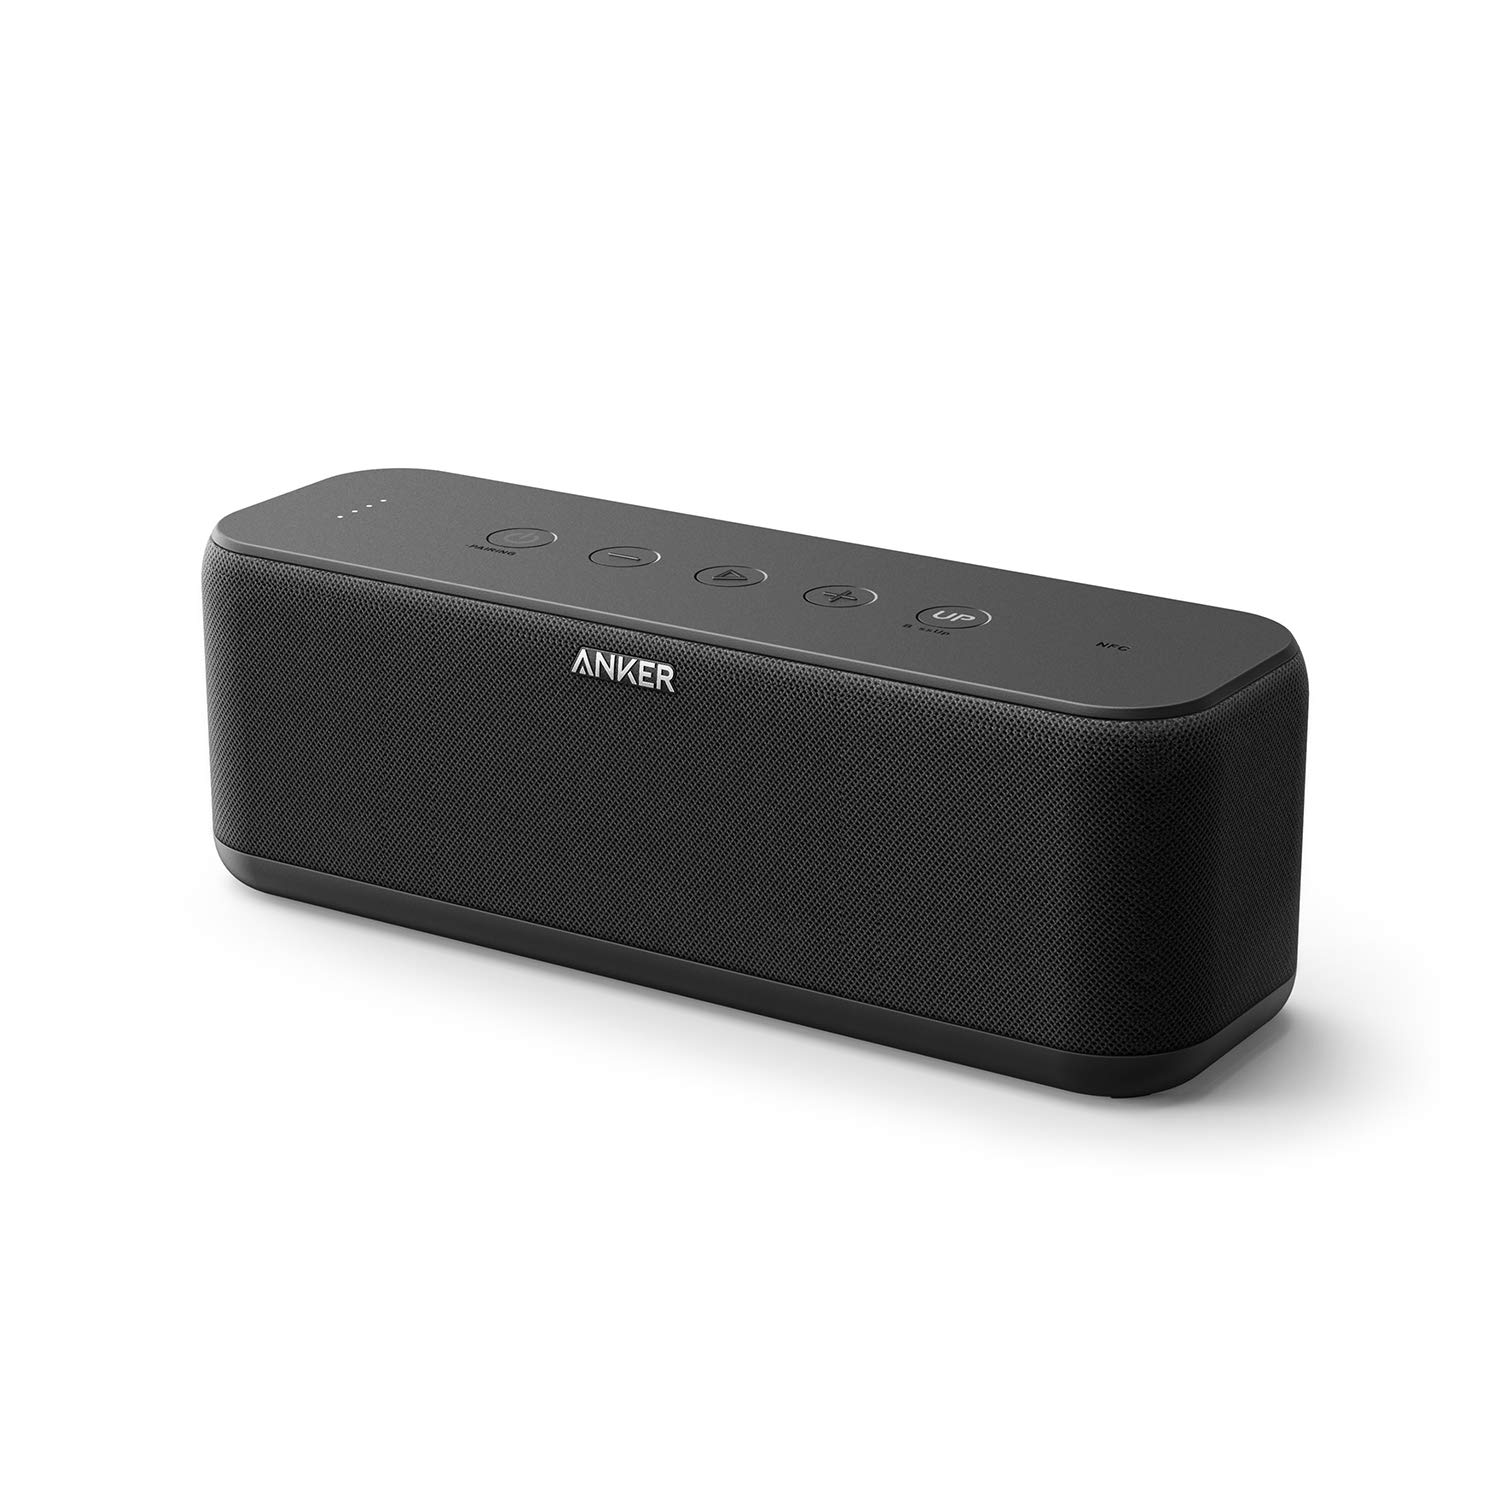 Anker Upgraded,  Soundcore Boost Bluetooth Speaker with Well-Balanced Sound, BassUp, 12H Playtime, USB-C, IPX7 Waterproof, Wireless Speaker with Customizable EQ via App, Wireless Stereo Pairing